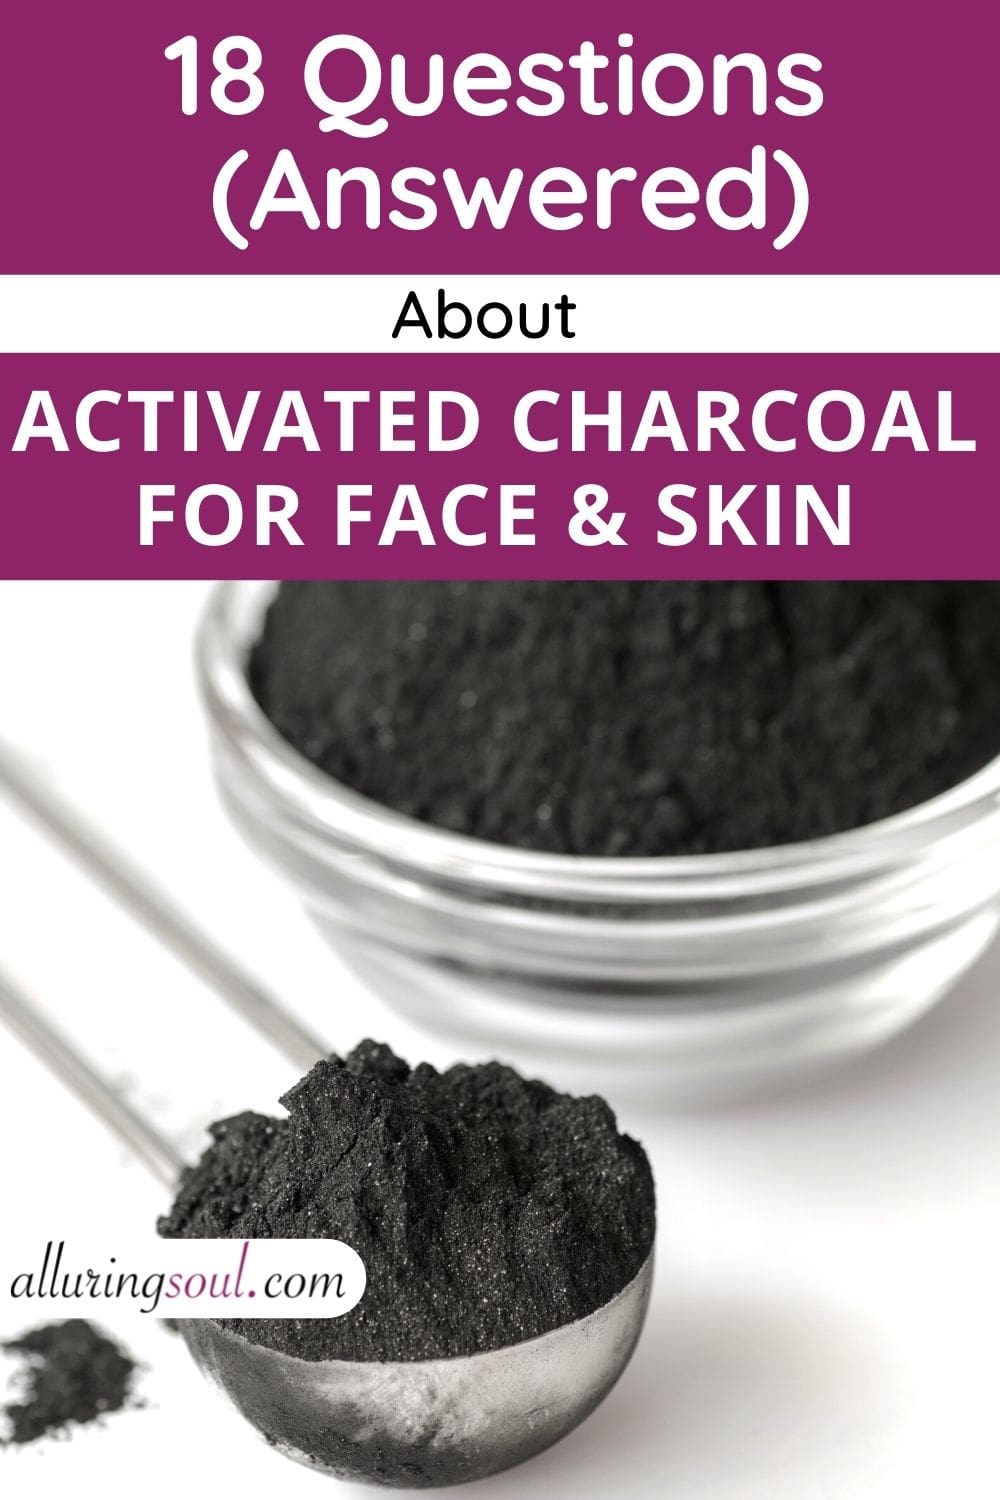 18 Questions about Activated Charcoal for Face and Skin (Answered)